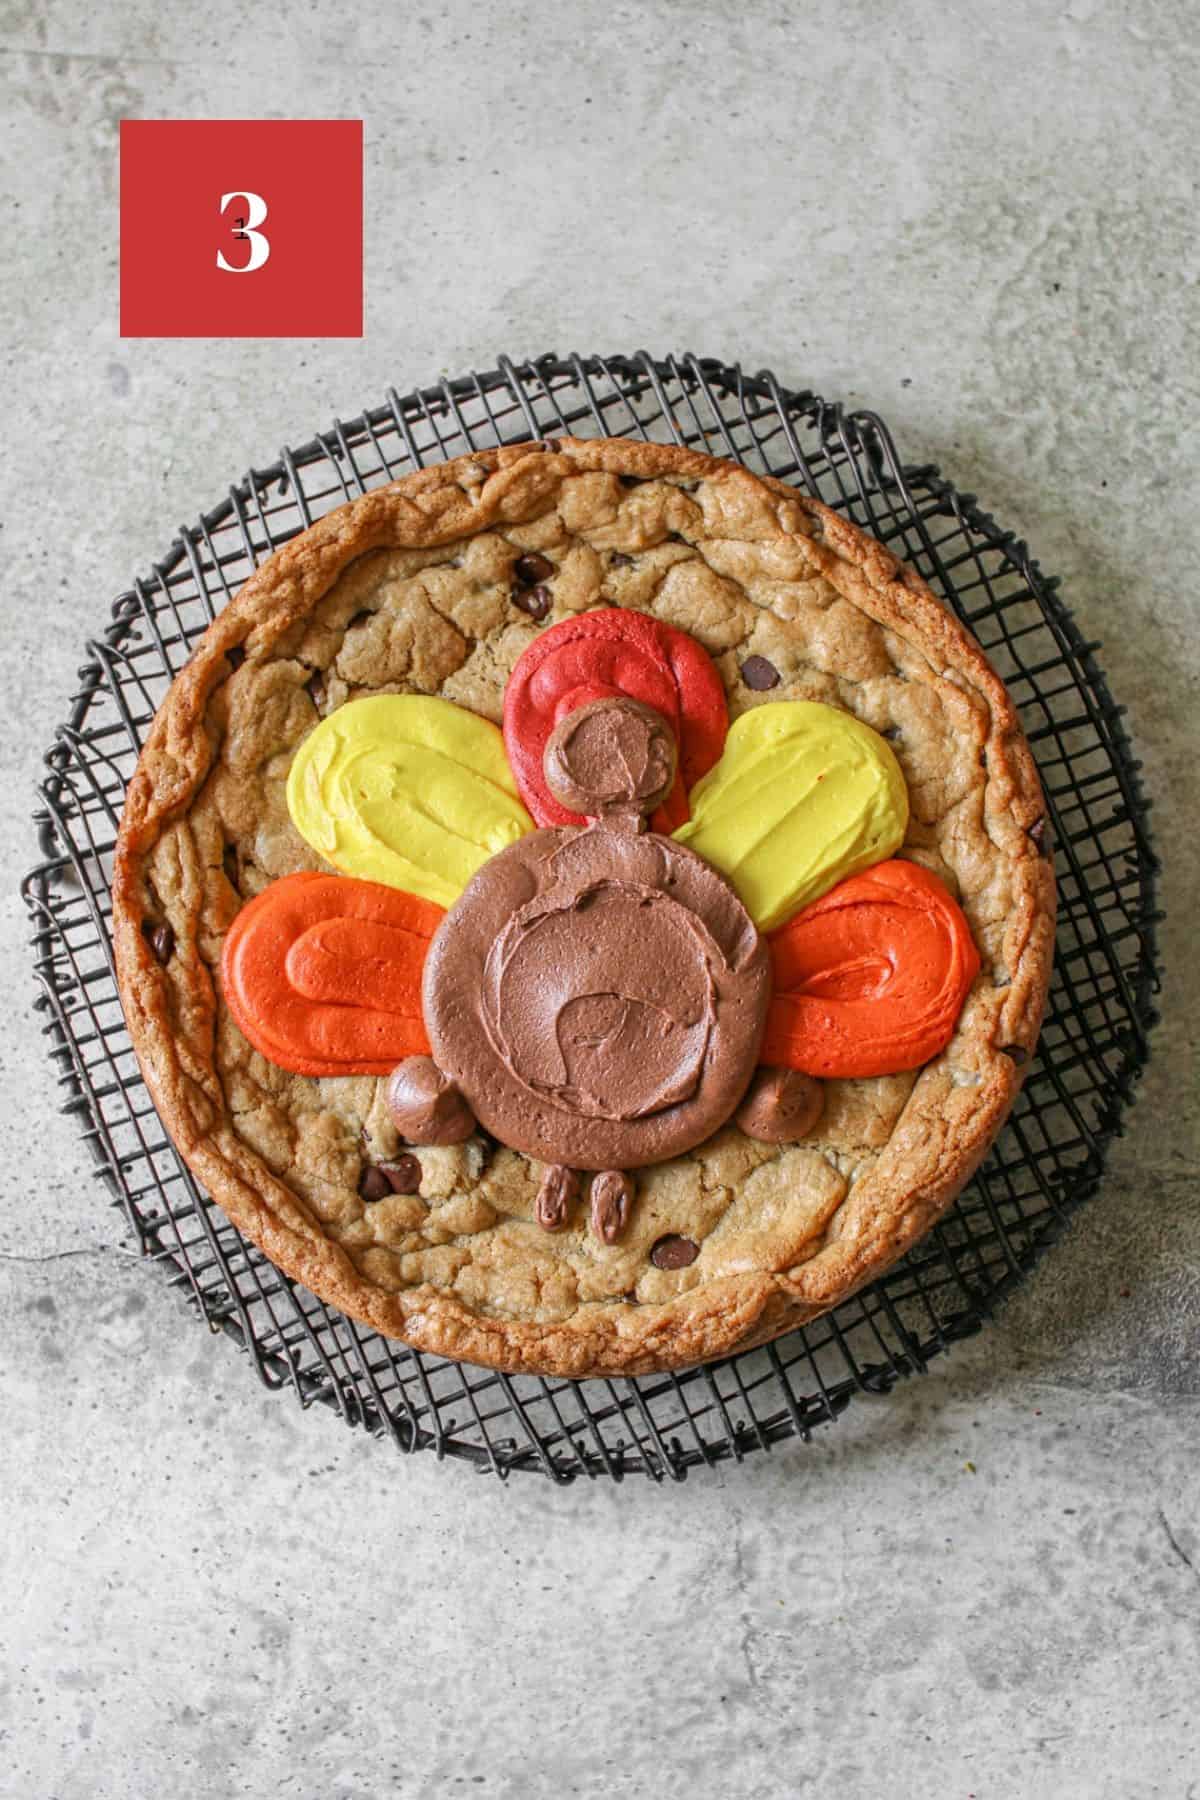 A cookie cake on a black wire trivet on a stone background. The cookie cake has 5 feathers that are tear drop shaped. From left to right, the feathers are orange, yellow, red, yellow and orange. On top of the feathers, is a brown turkey body, head and wings, neck and legs on the side. In the upper left corner is a dark red square with a white '3' in the center.